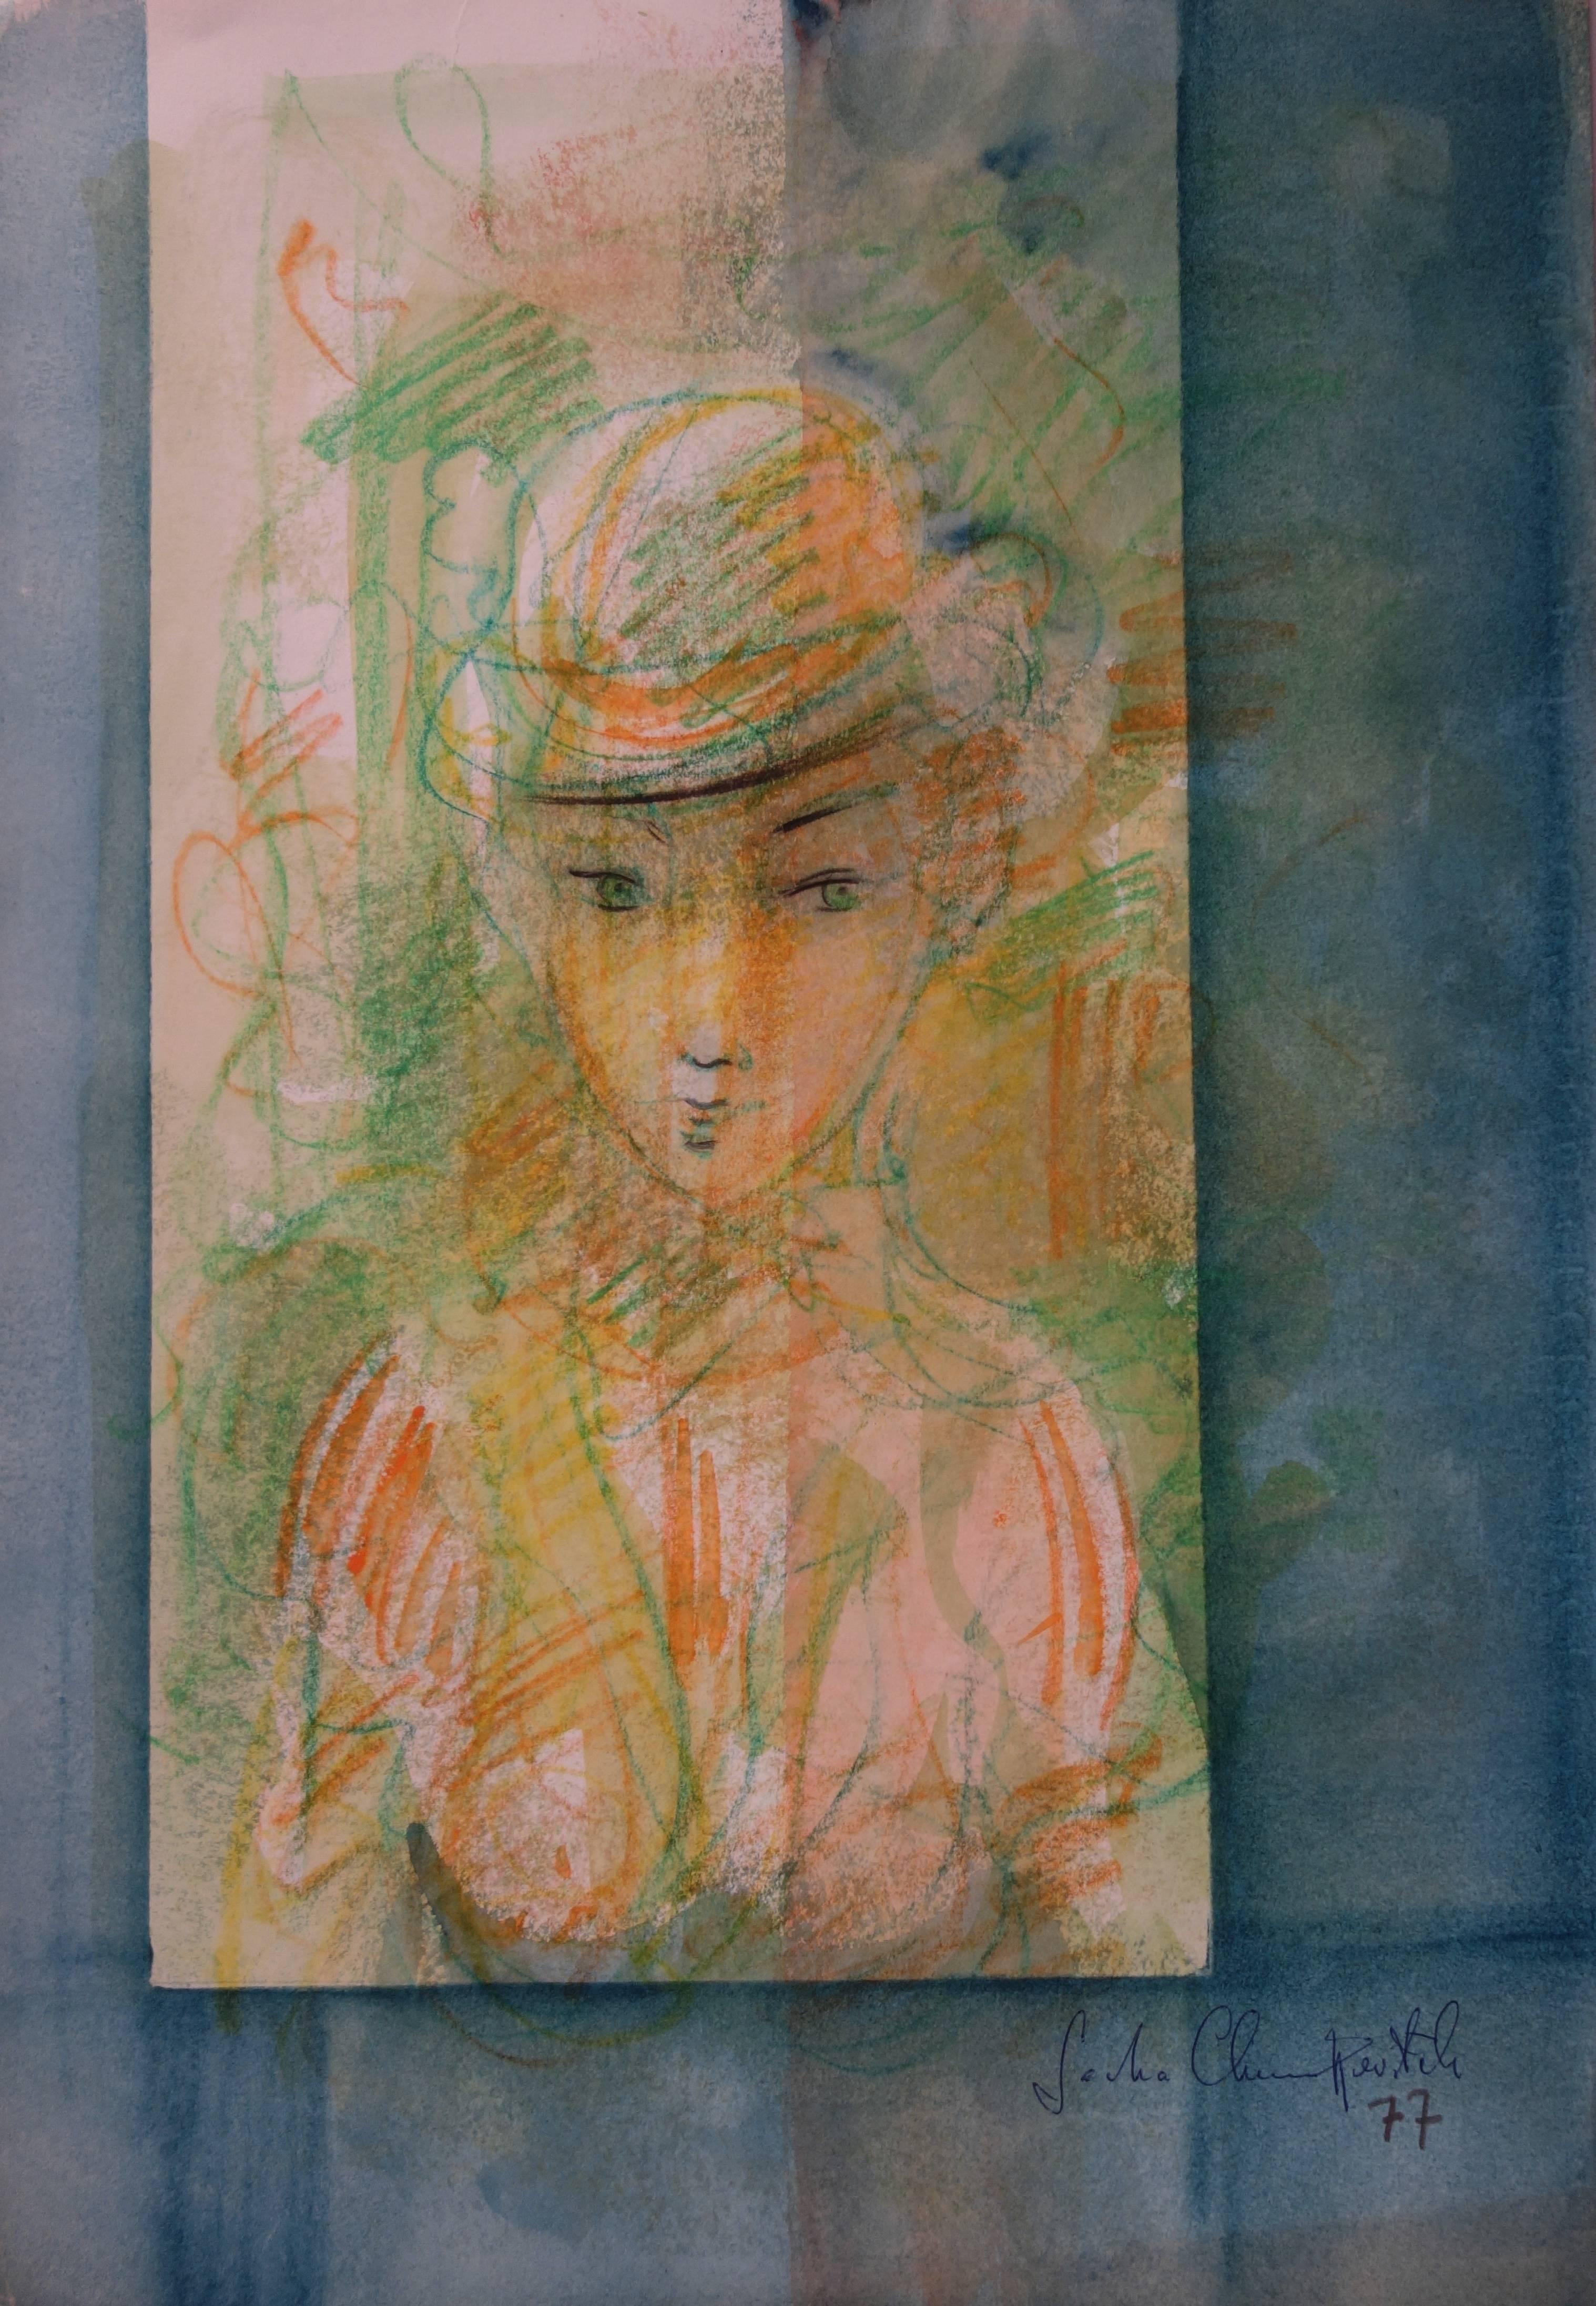 Woman With a Hat at The Window - Original signed Watercolor - 1977 - Realist Art by Sacha Chimkevitch